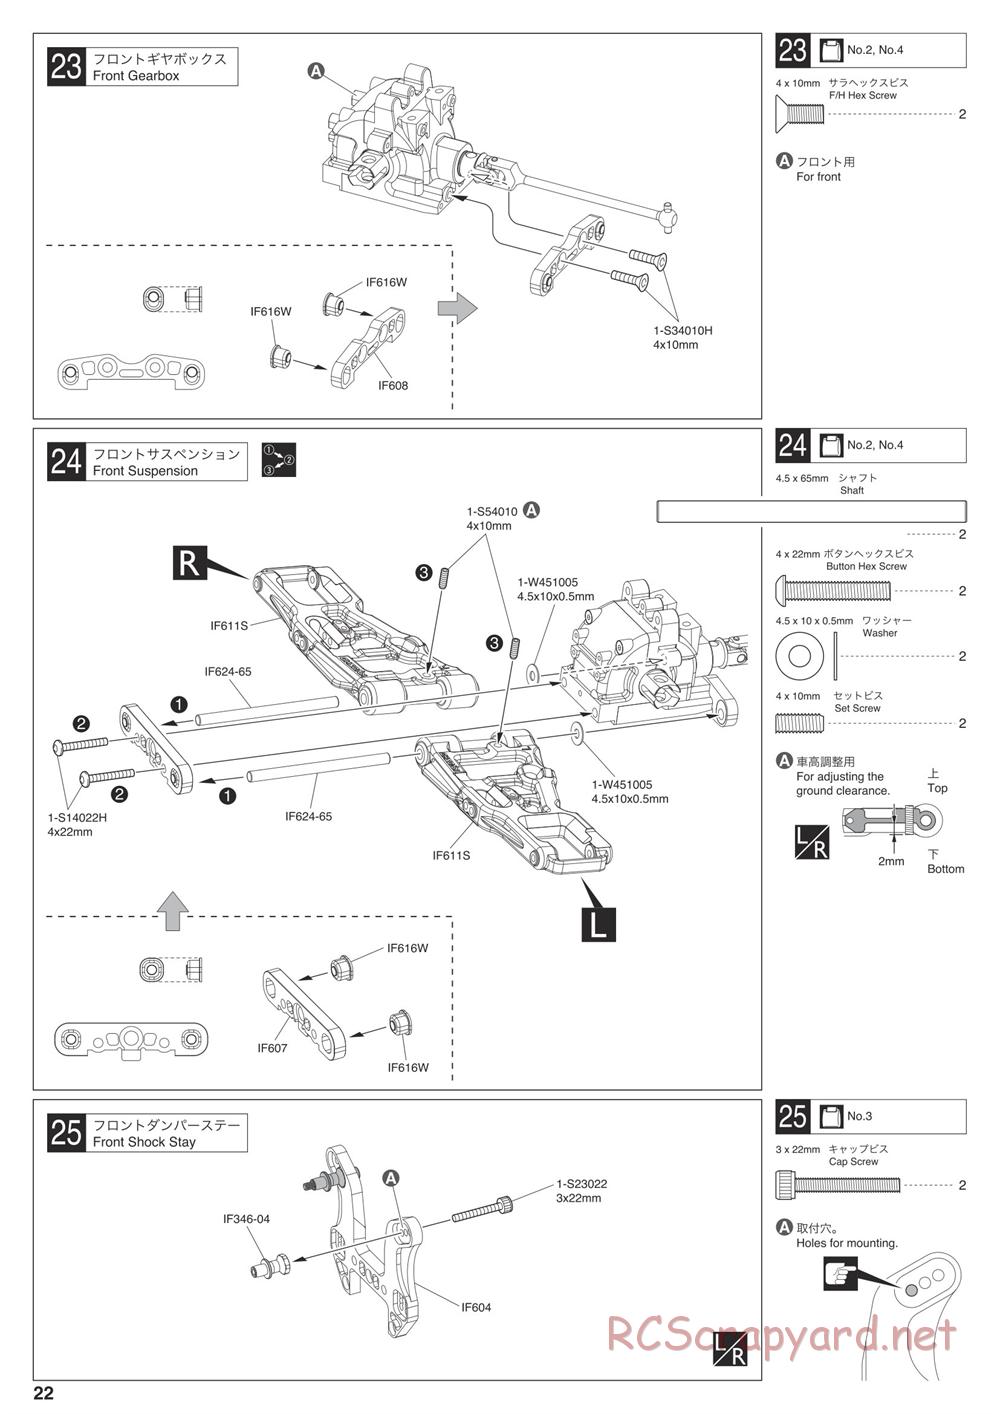 Kyosho - Inferno MP10 - Manual - Page 22